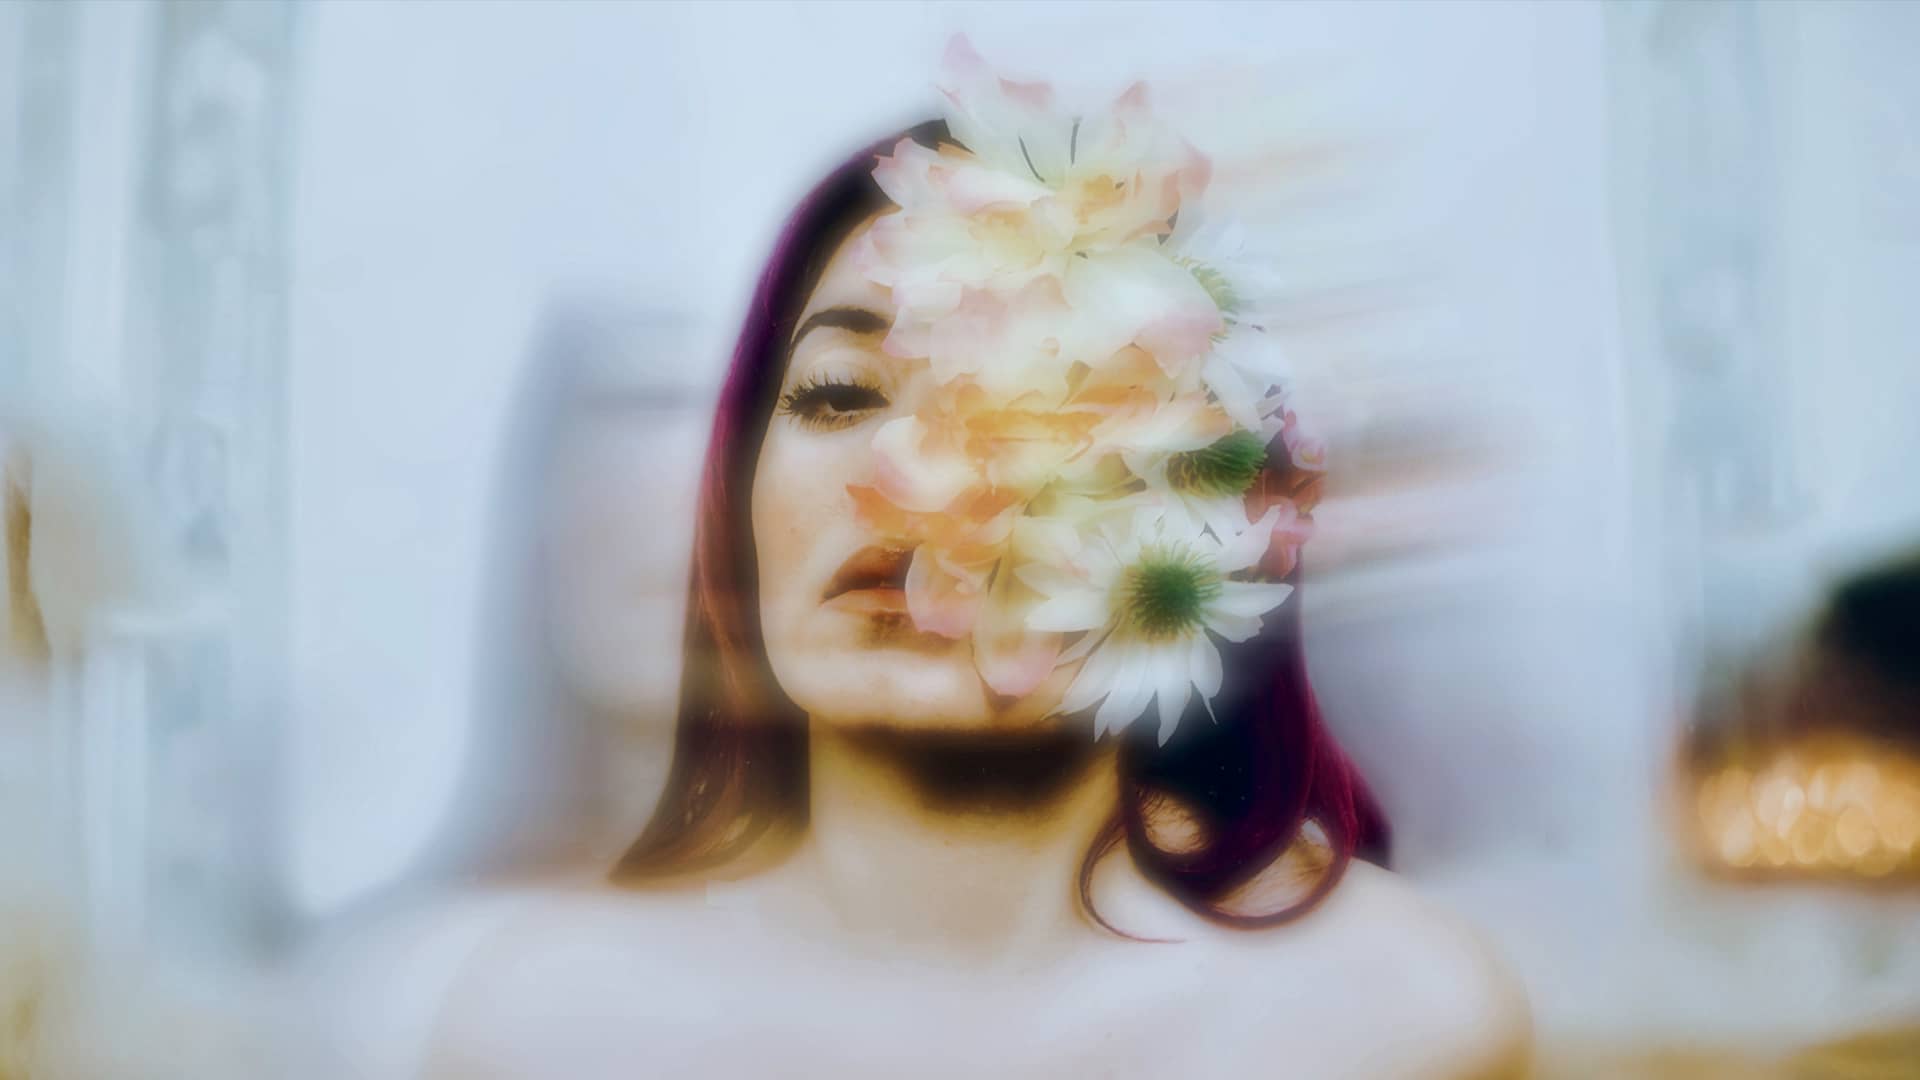 Artist with flowers covering her face evoking a dreamy, artistic vibe, hinting at the transformative theme of her music.